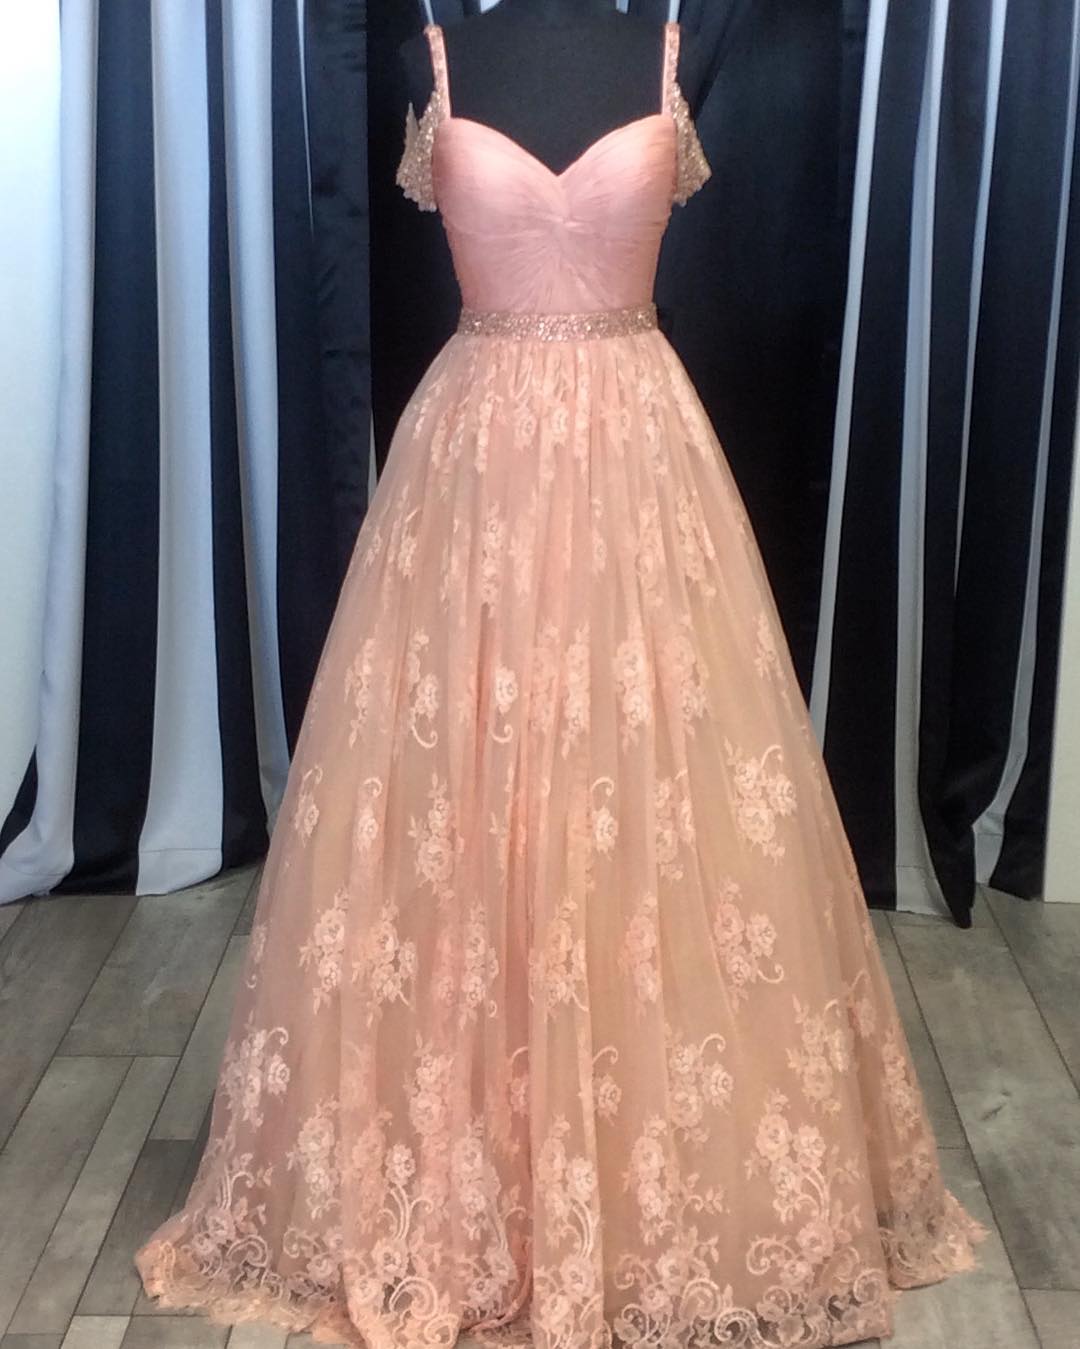 Evening Dresses, Prom Dresses,party Dresses, Prom Dress,modest Prom Dress,blush Pink Lace Ball Gowns Prom Dress 2017 Women's